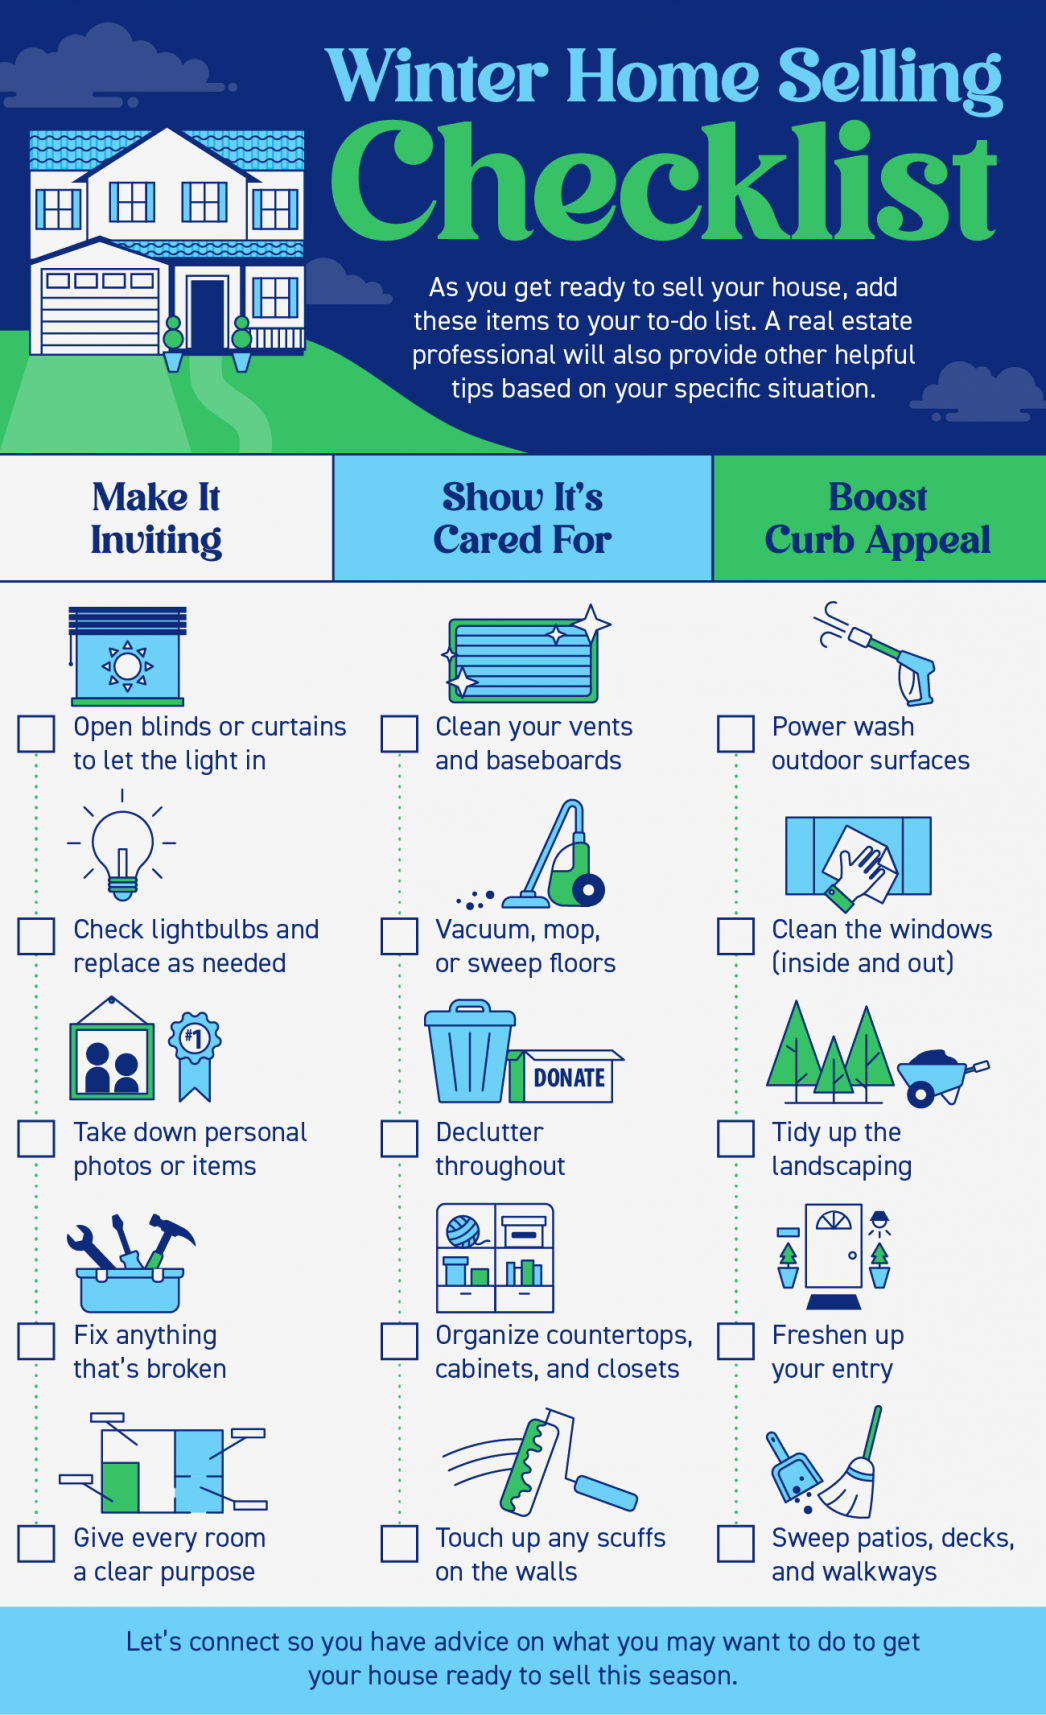 Winter Home Selling Checklist | MyKCM